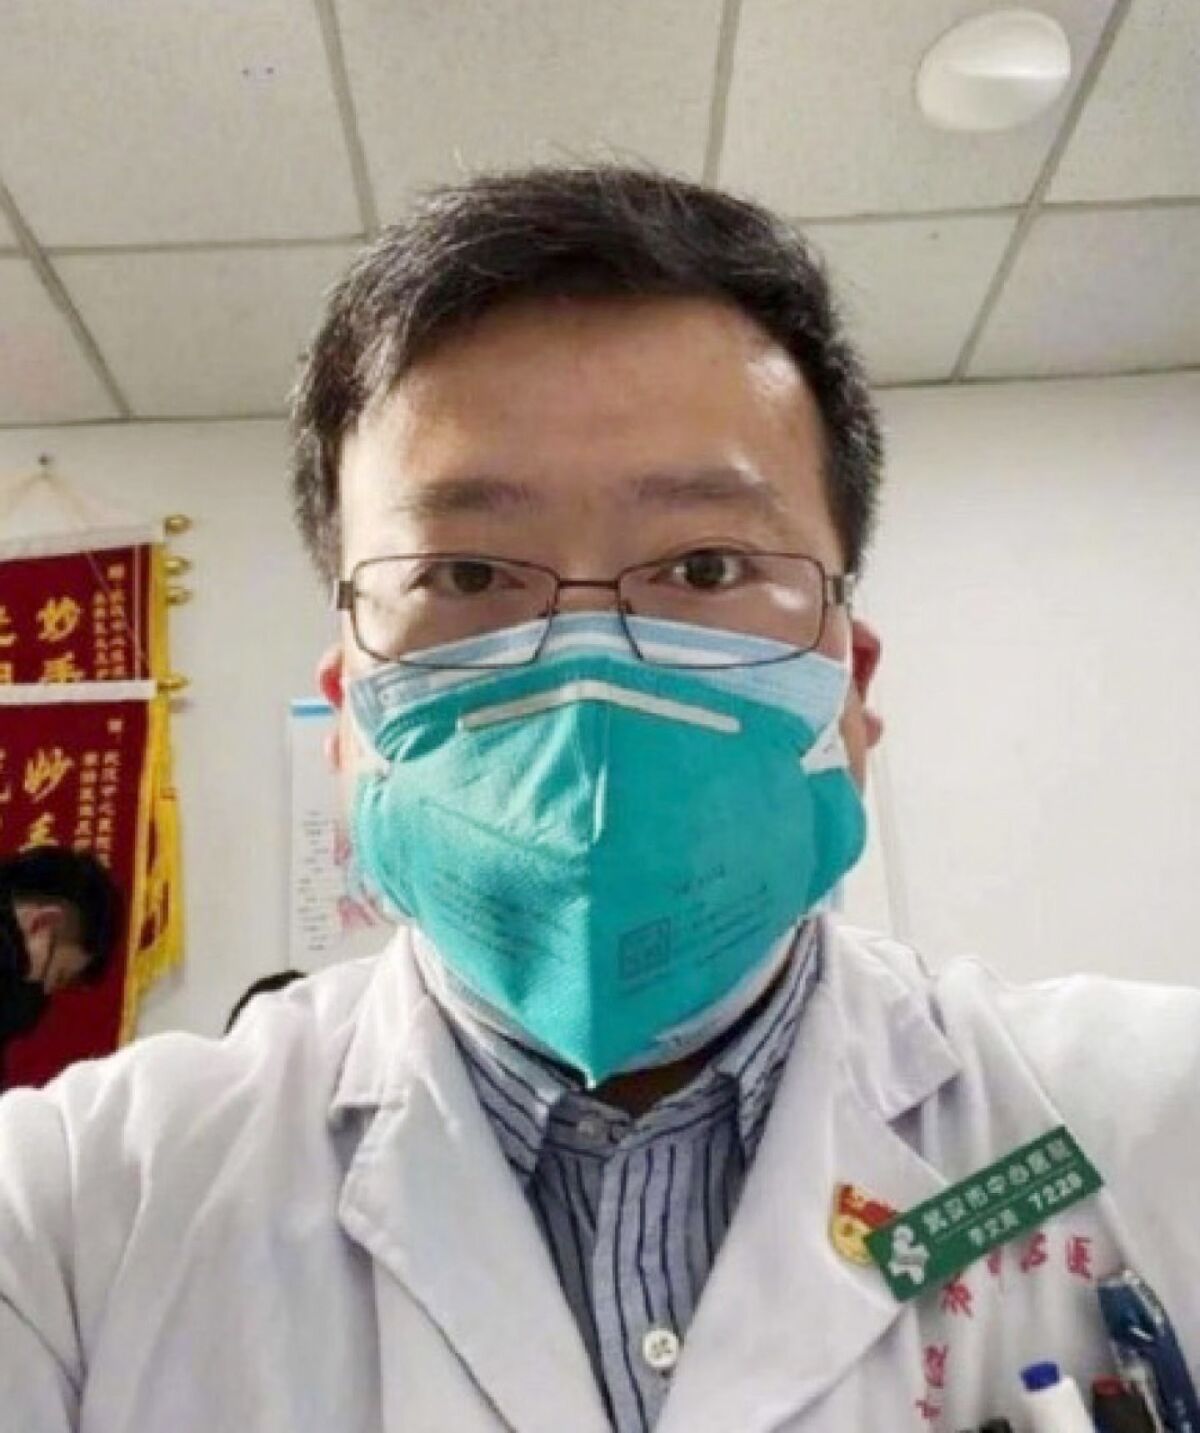 Dr. Li Wenliang, who was silenced for trying to share news about the new coronavirus long before Chinese authorities disclosed its full threat, died Feb. 7, 2020, of the disease.